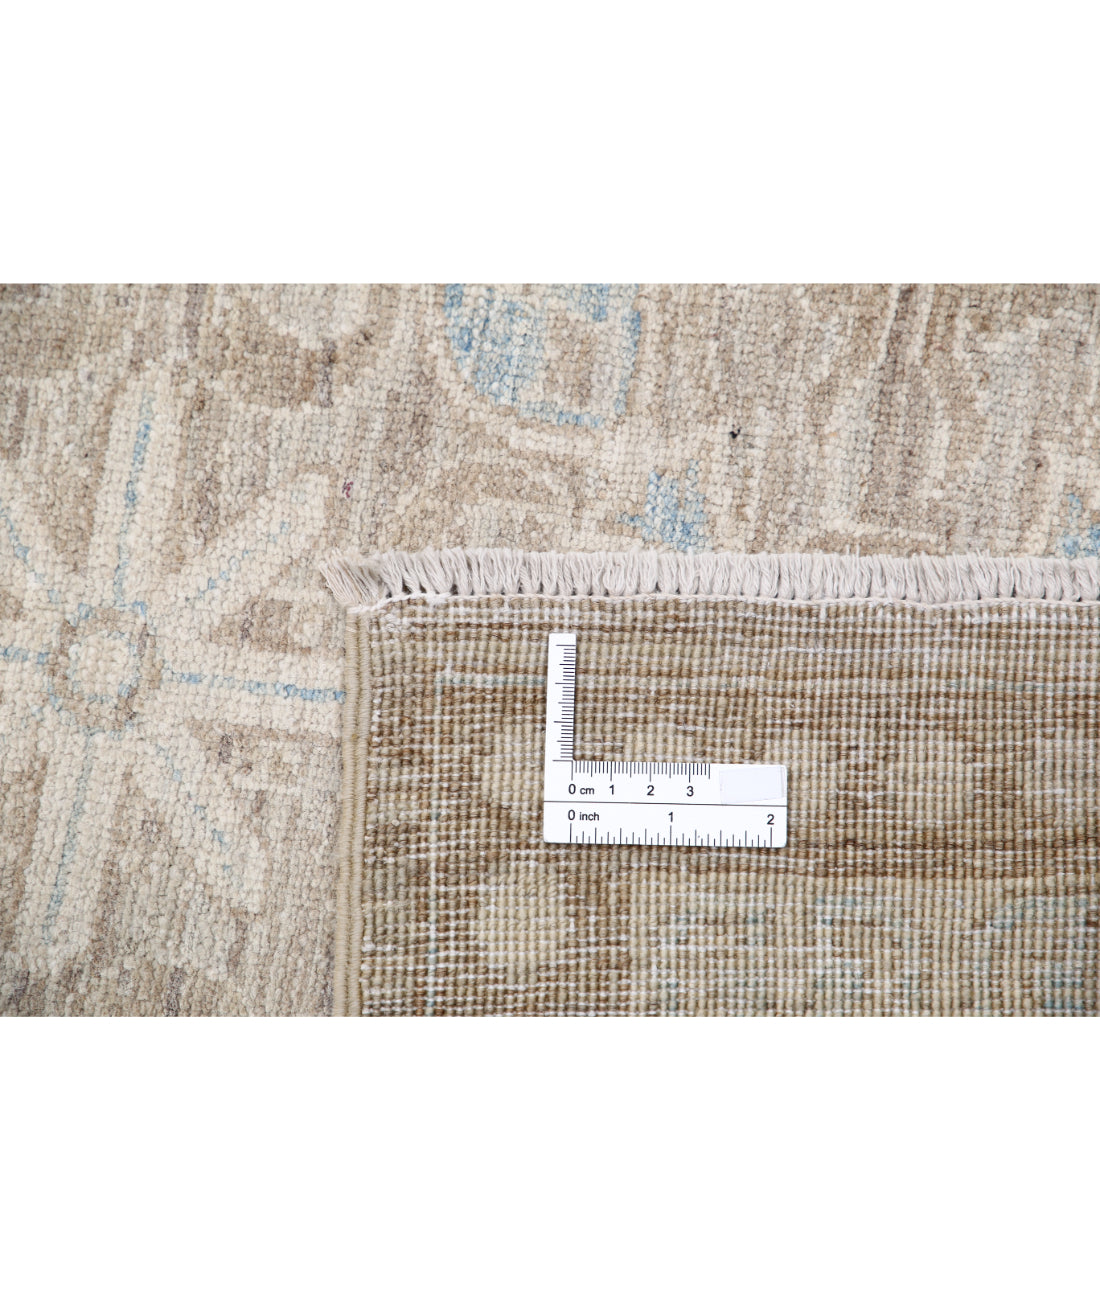 Hand Knotted Serenity Wool Rug - 5'7'' x 8'5'' 5'7'' x 8'5'' (168 X 253) / Taupe / Ivory